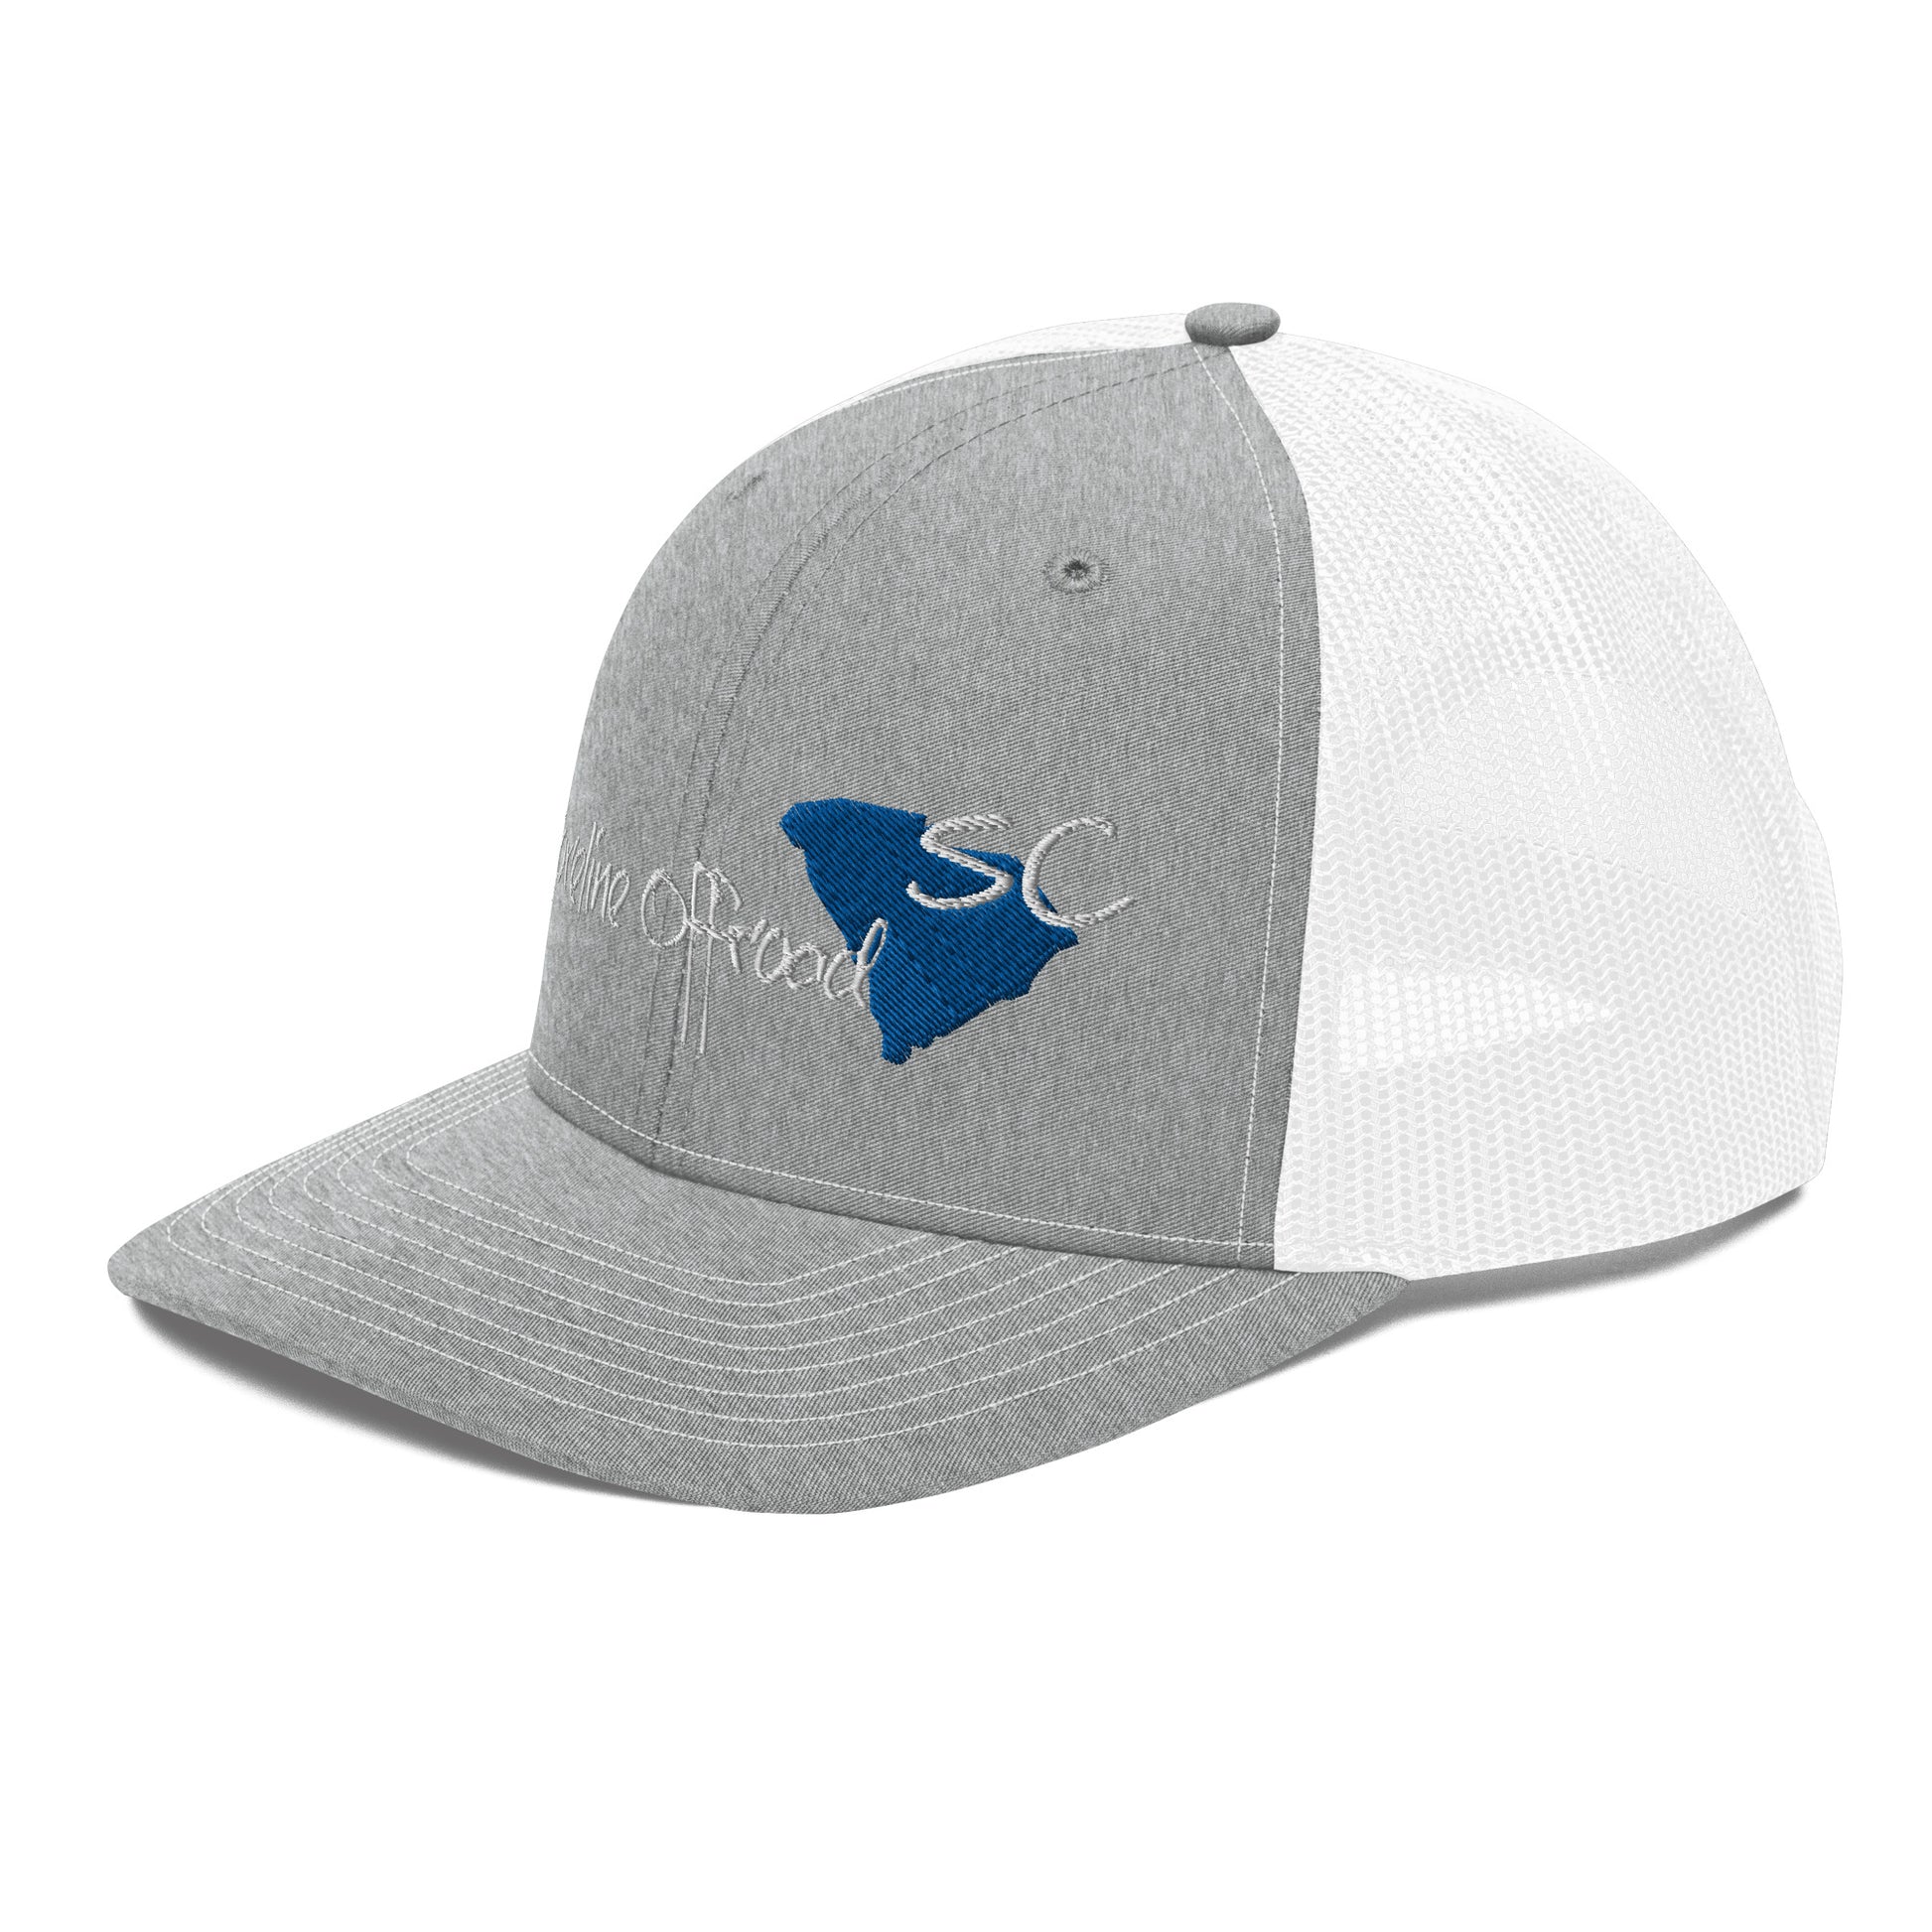 a gray and white hat with the state of south carolina on it